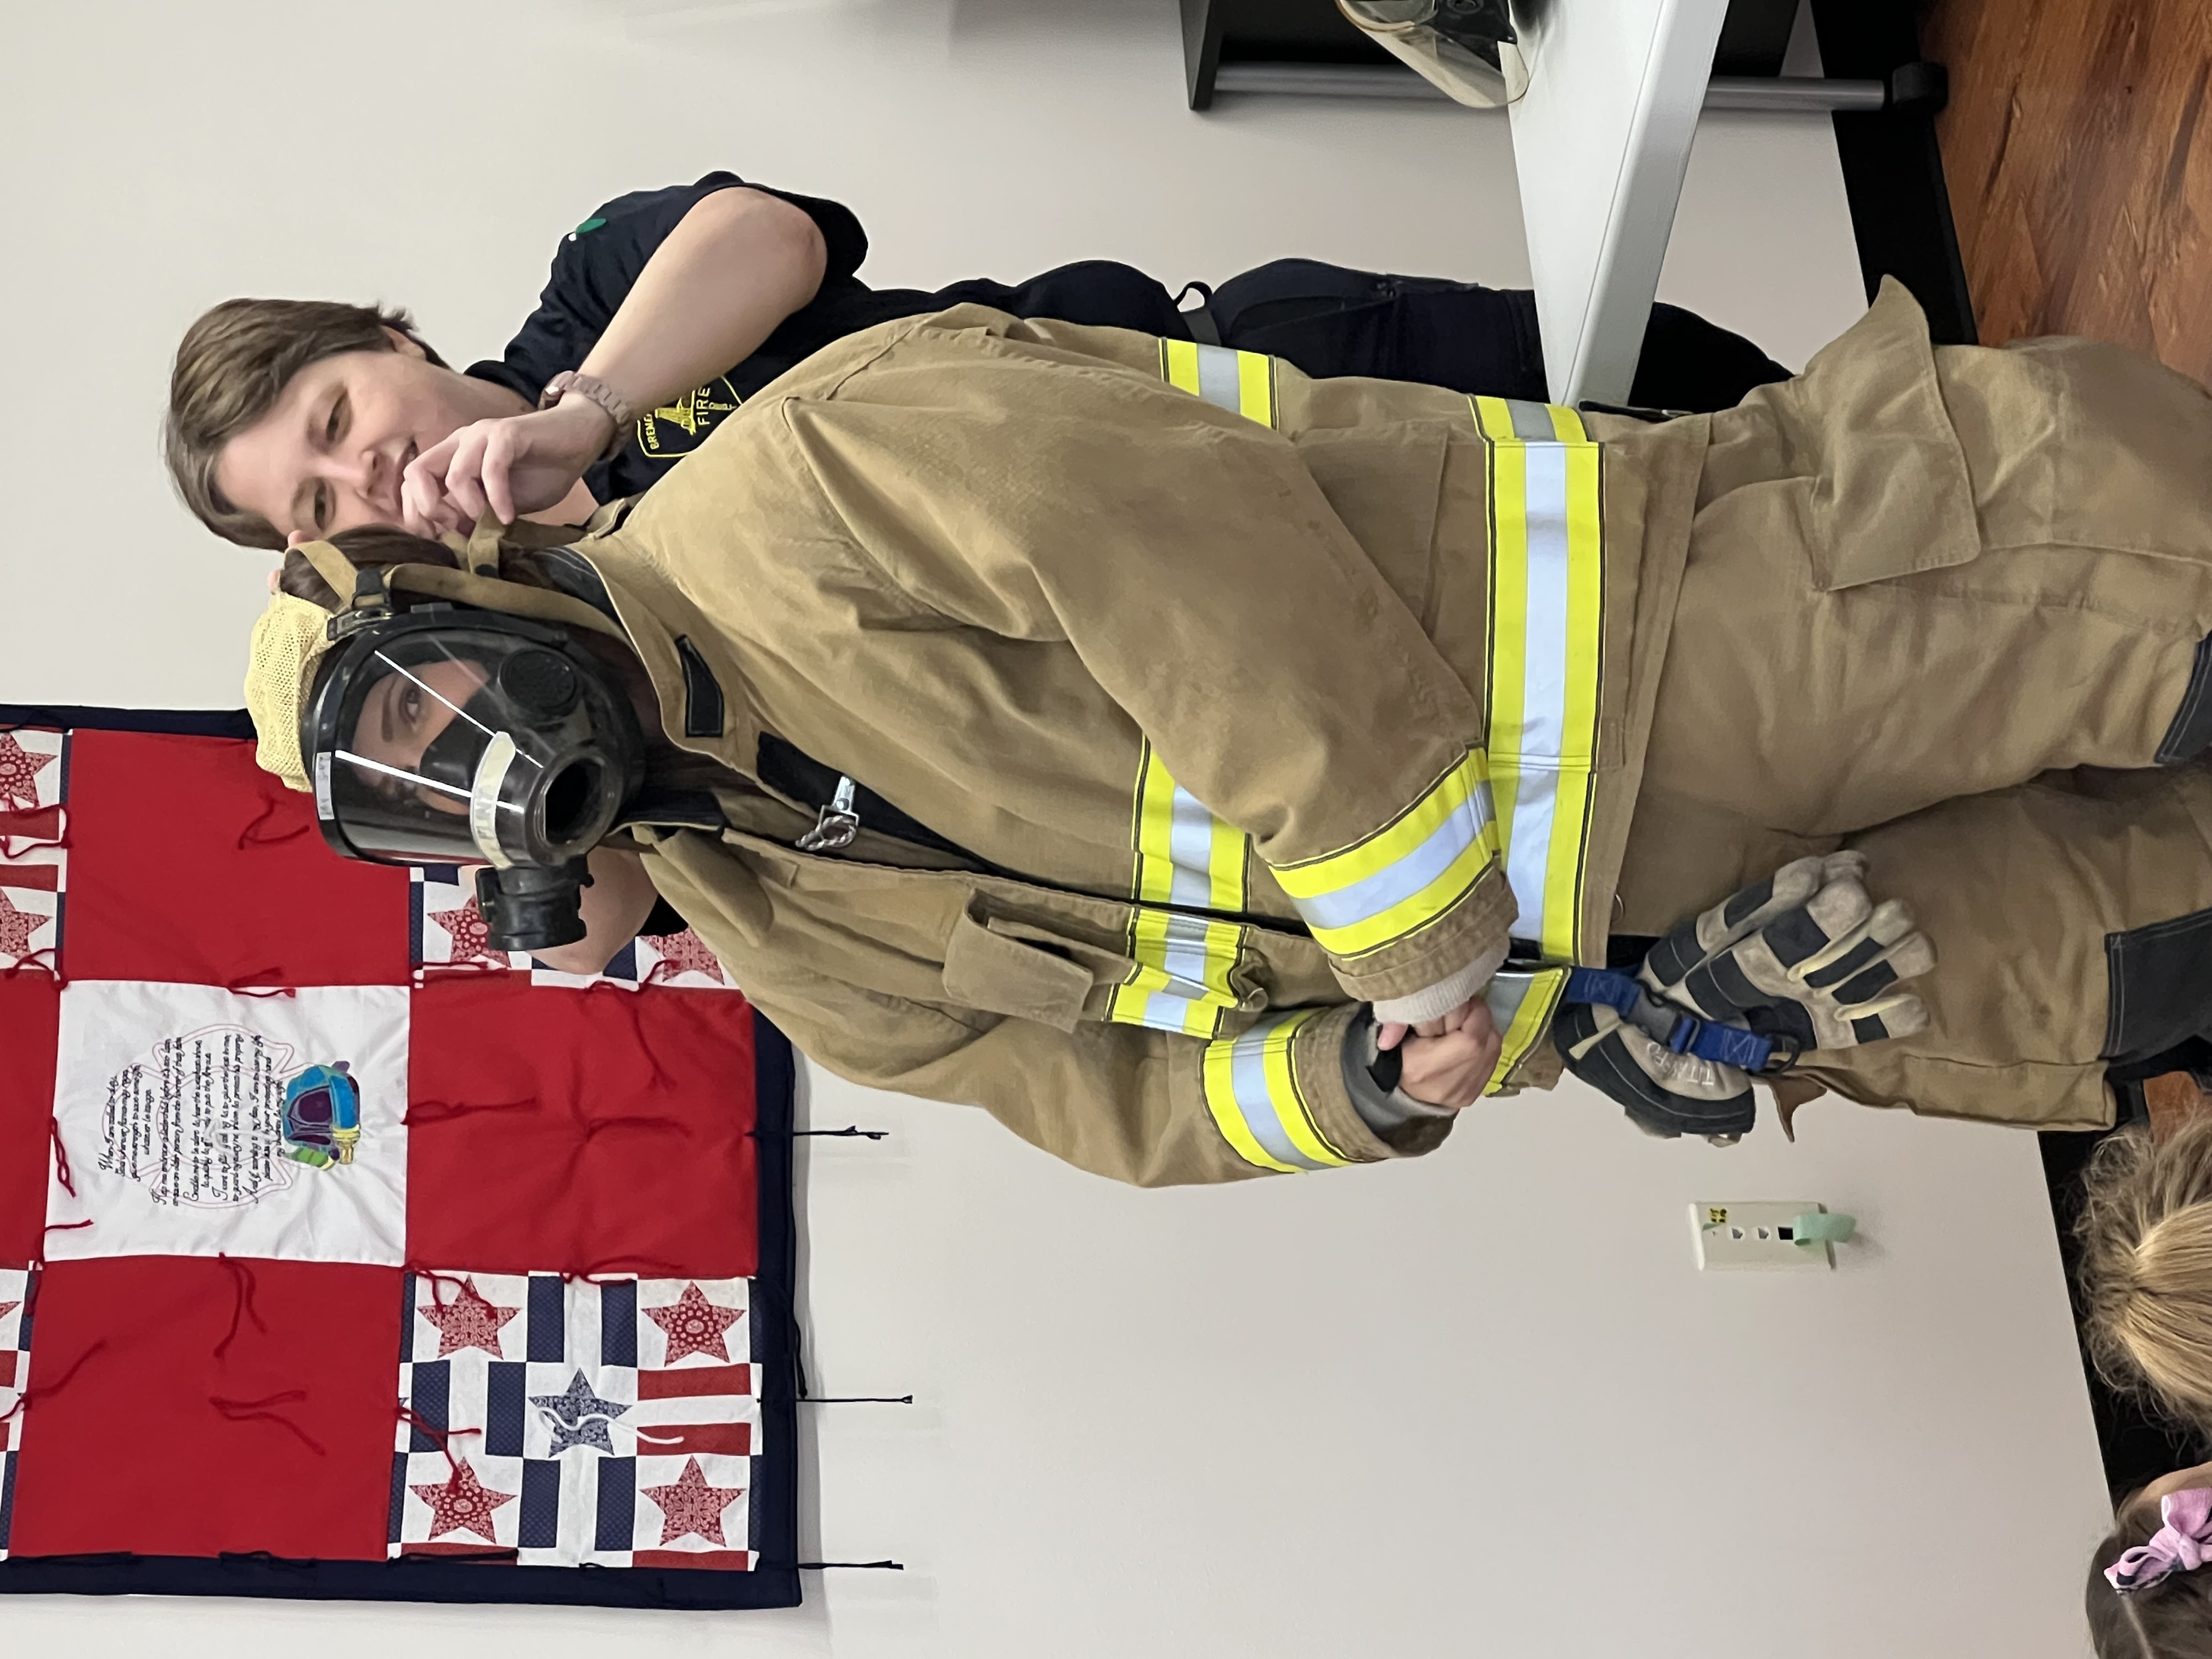 Miss Stewart eyes the camera as a firefighter adjusts her gear.